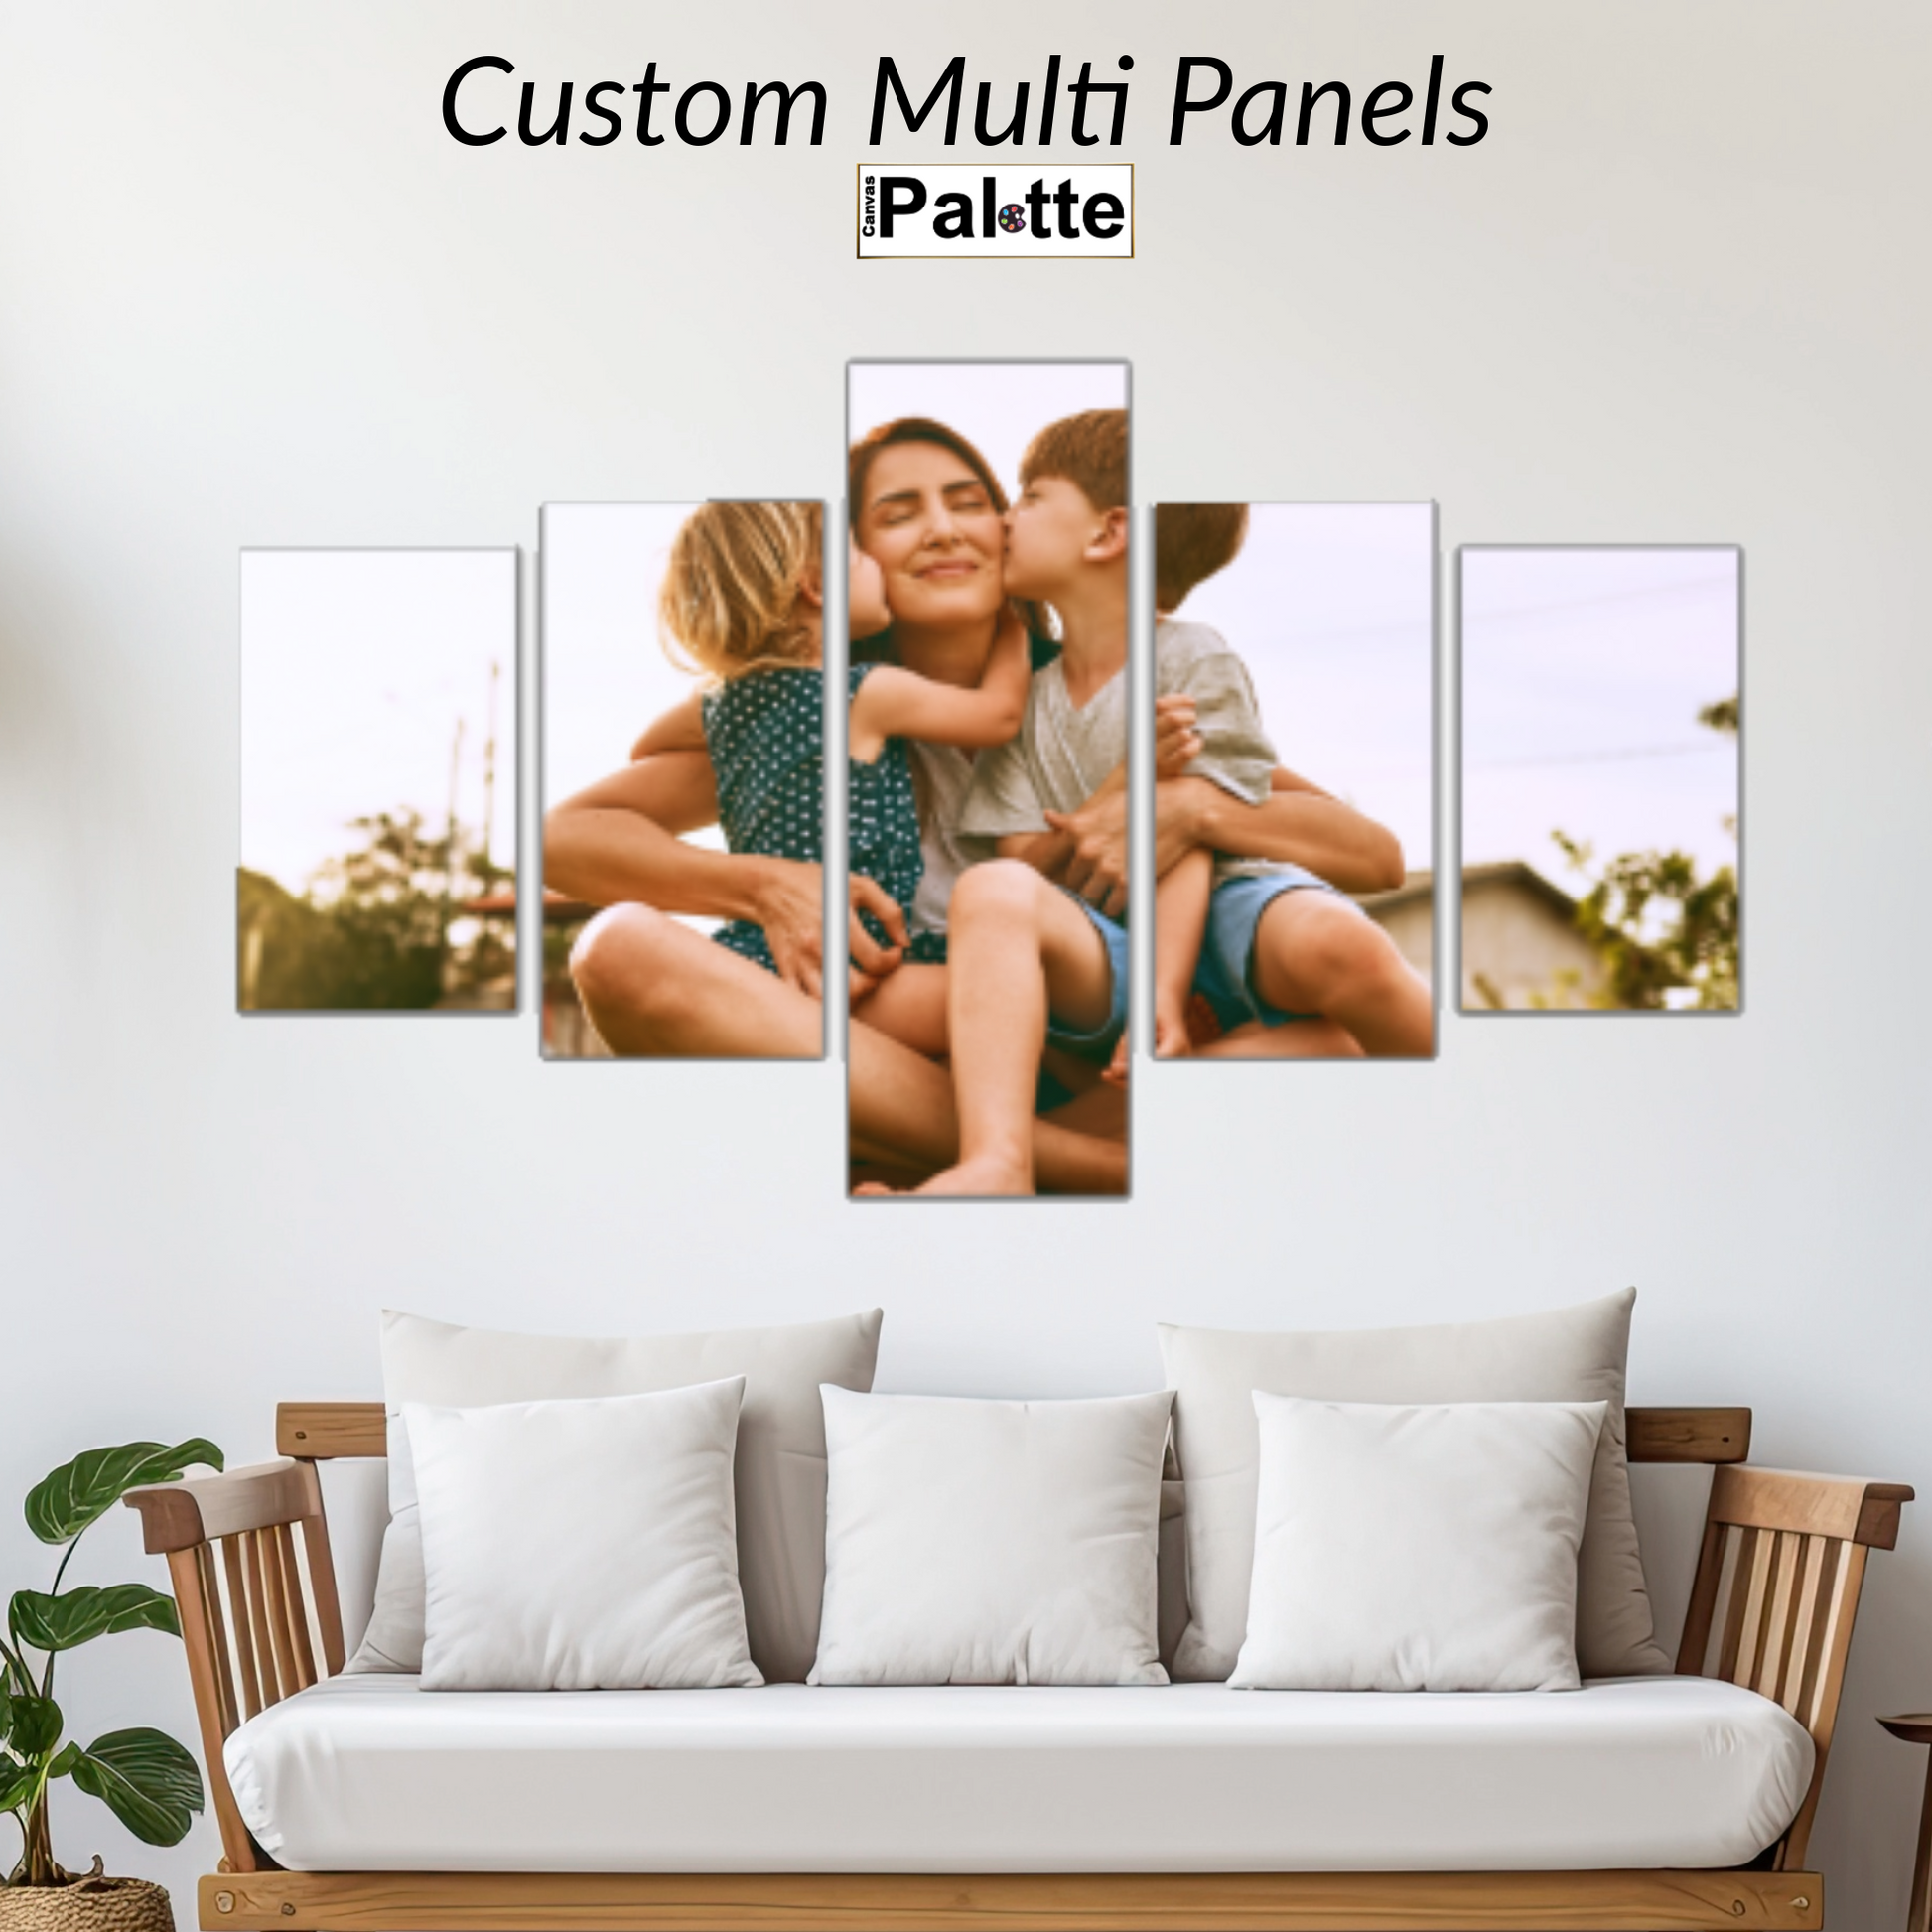 Example custom Multi Panels for canvas printed at Canvas Palette. the image shows a portrait hanging on the wall of the living room where there is a family, the mother hugs her 2 little children.